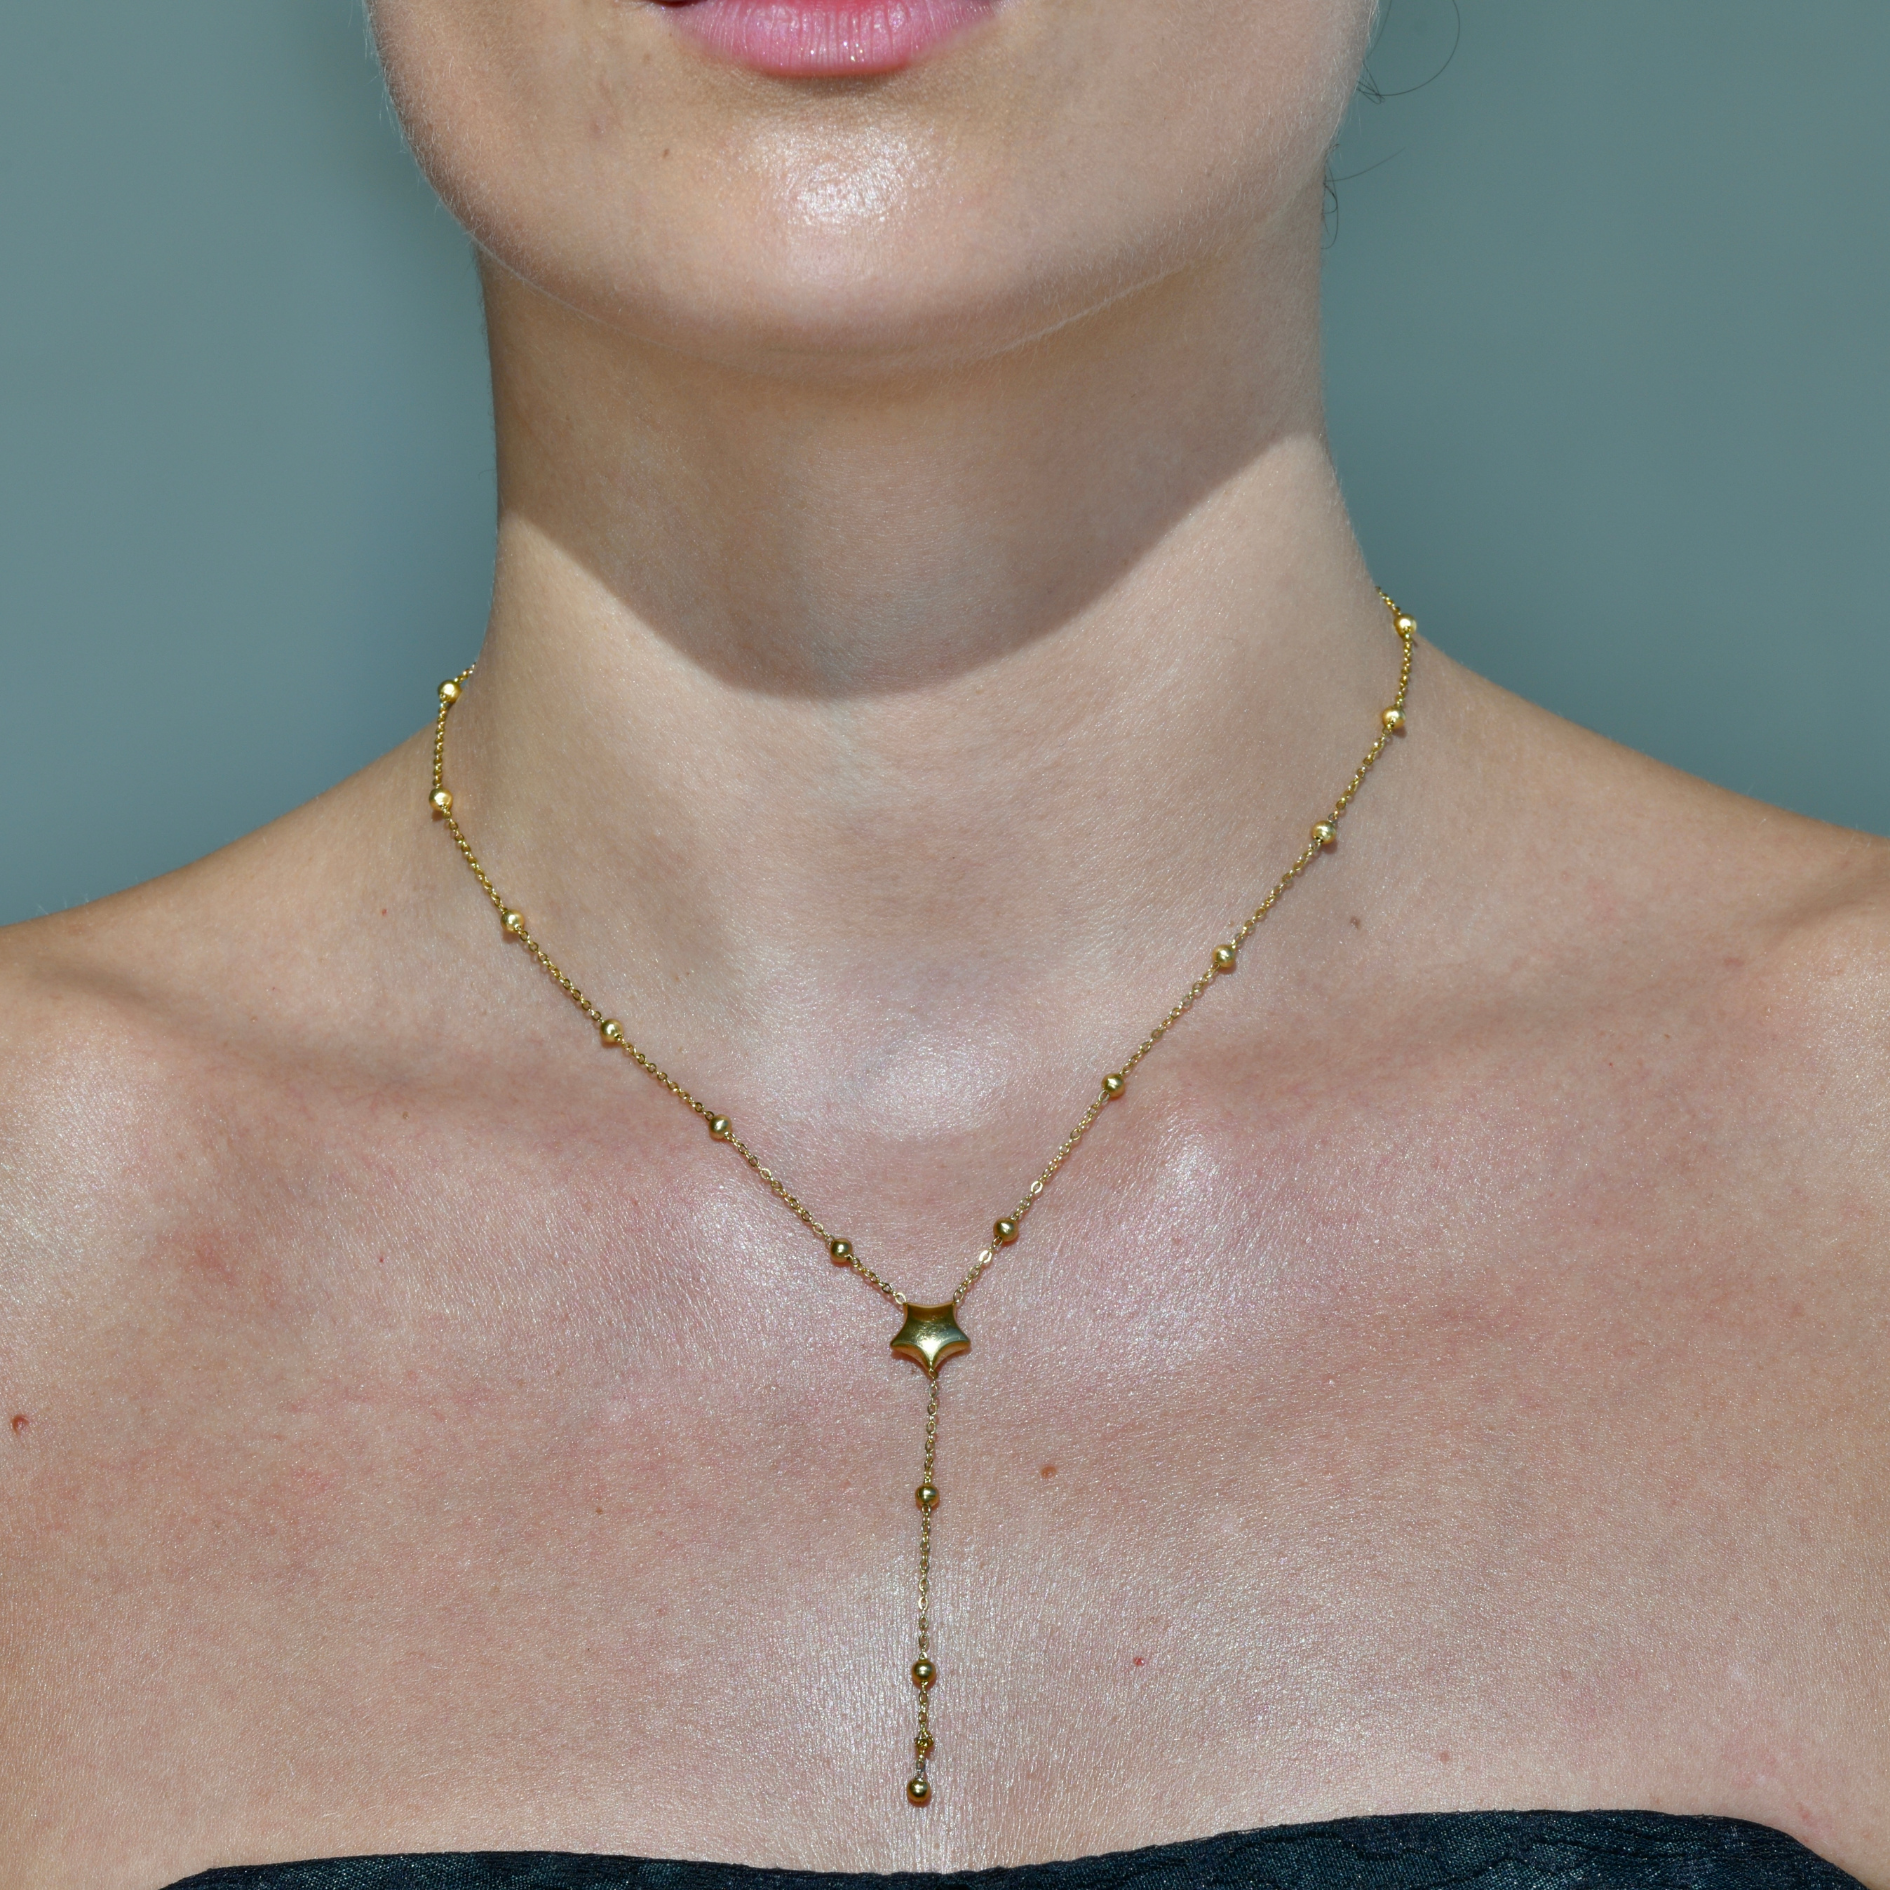 ETOILE Dainty Chain Necklace. Gold dainty chain. Starg gold pendnat in the middle of the chain. A gold beaded chain extension drop from the star pendnat.